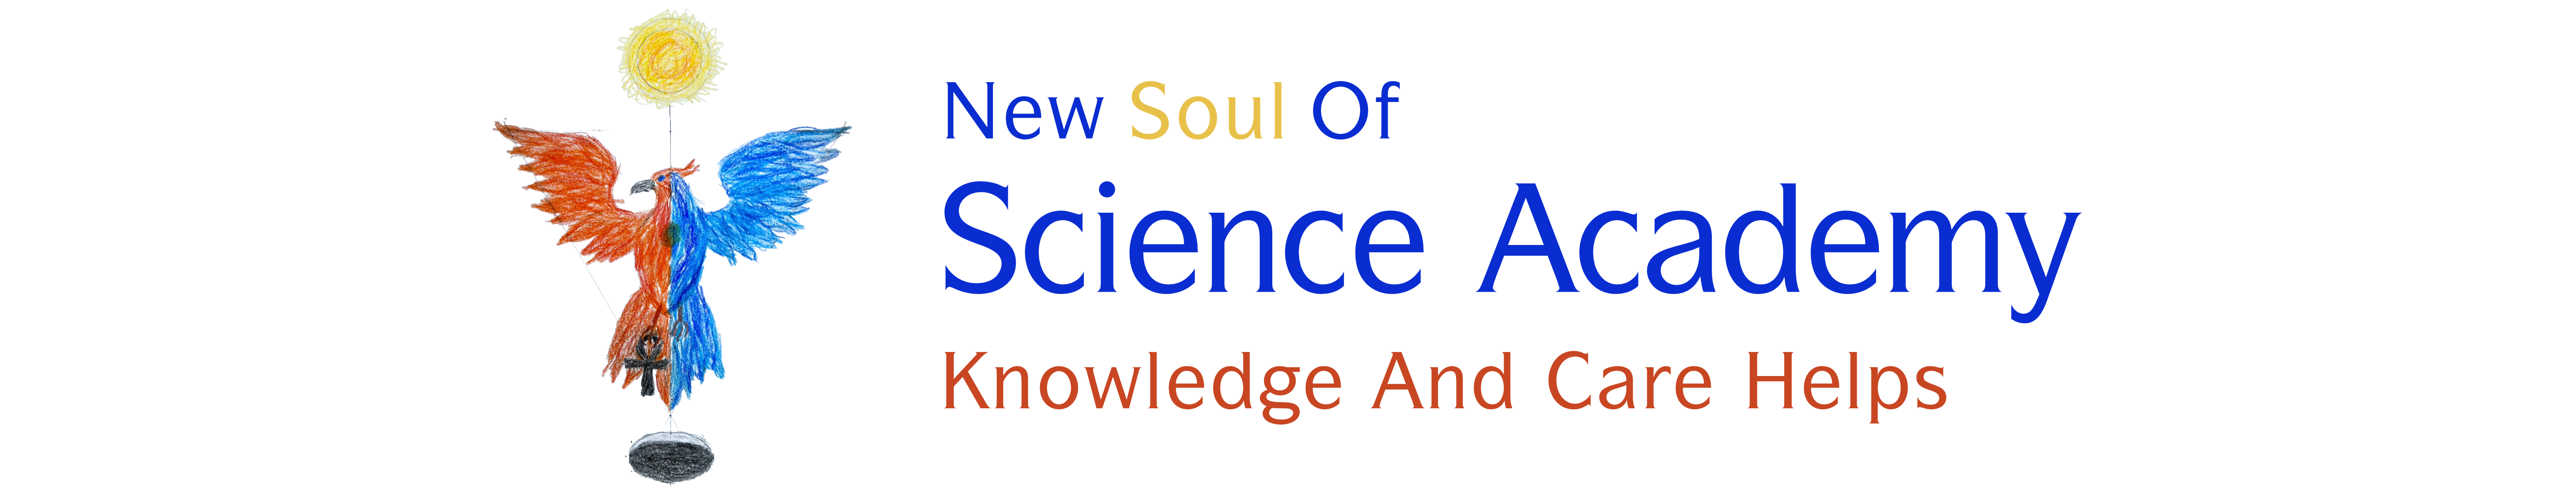 New Soul Of Science Project, Knowledge And Care Helps